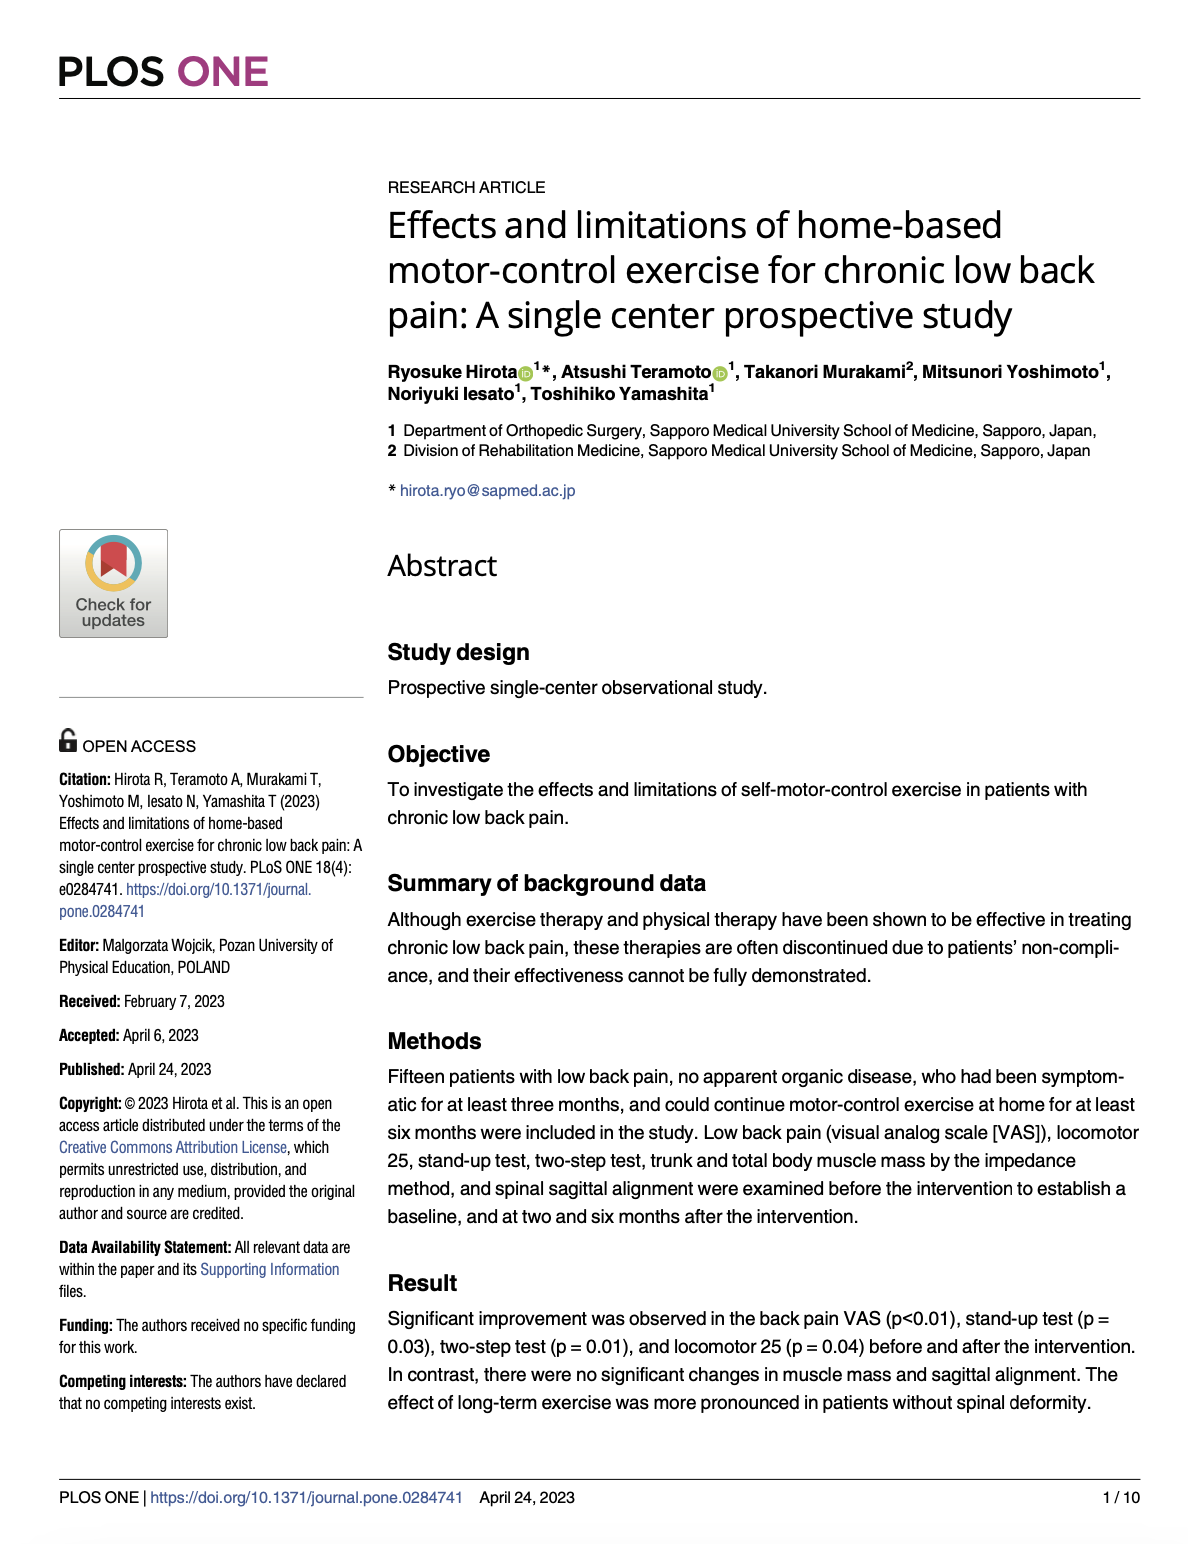 Effects and limitations of home-based motor-control exercise for chronic low back pain: A single center prospective study